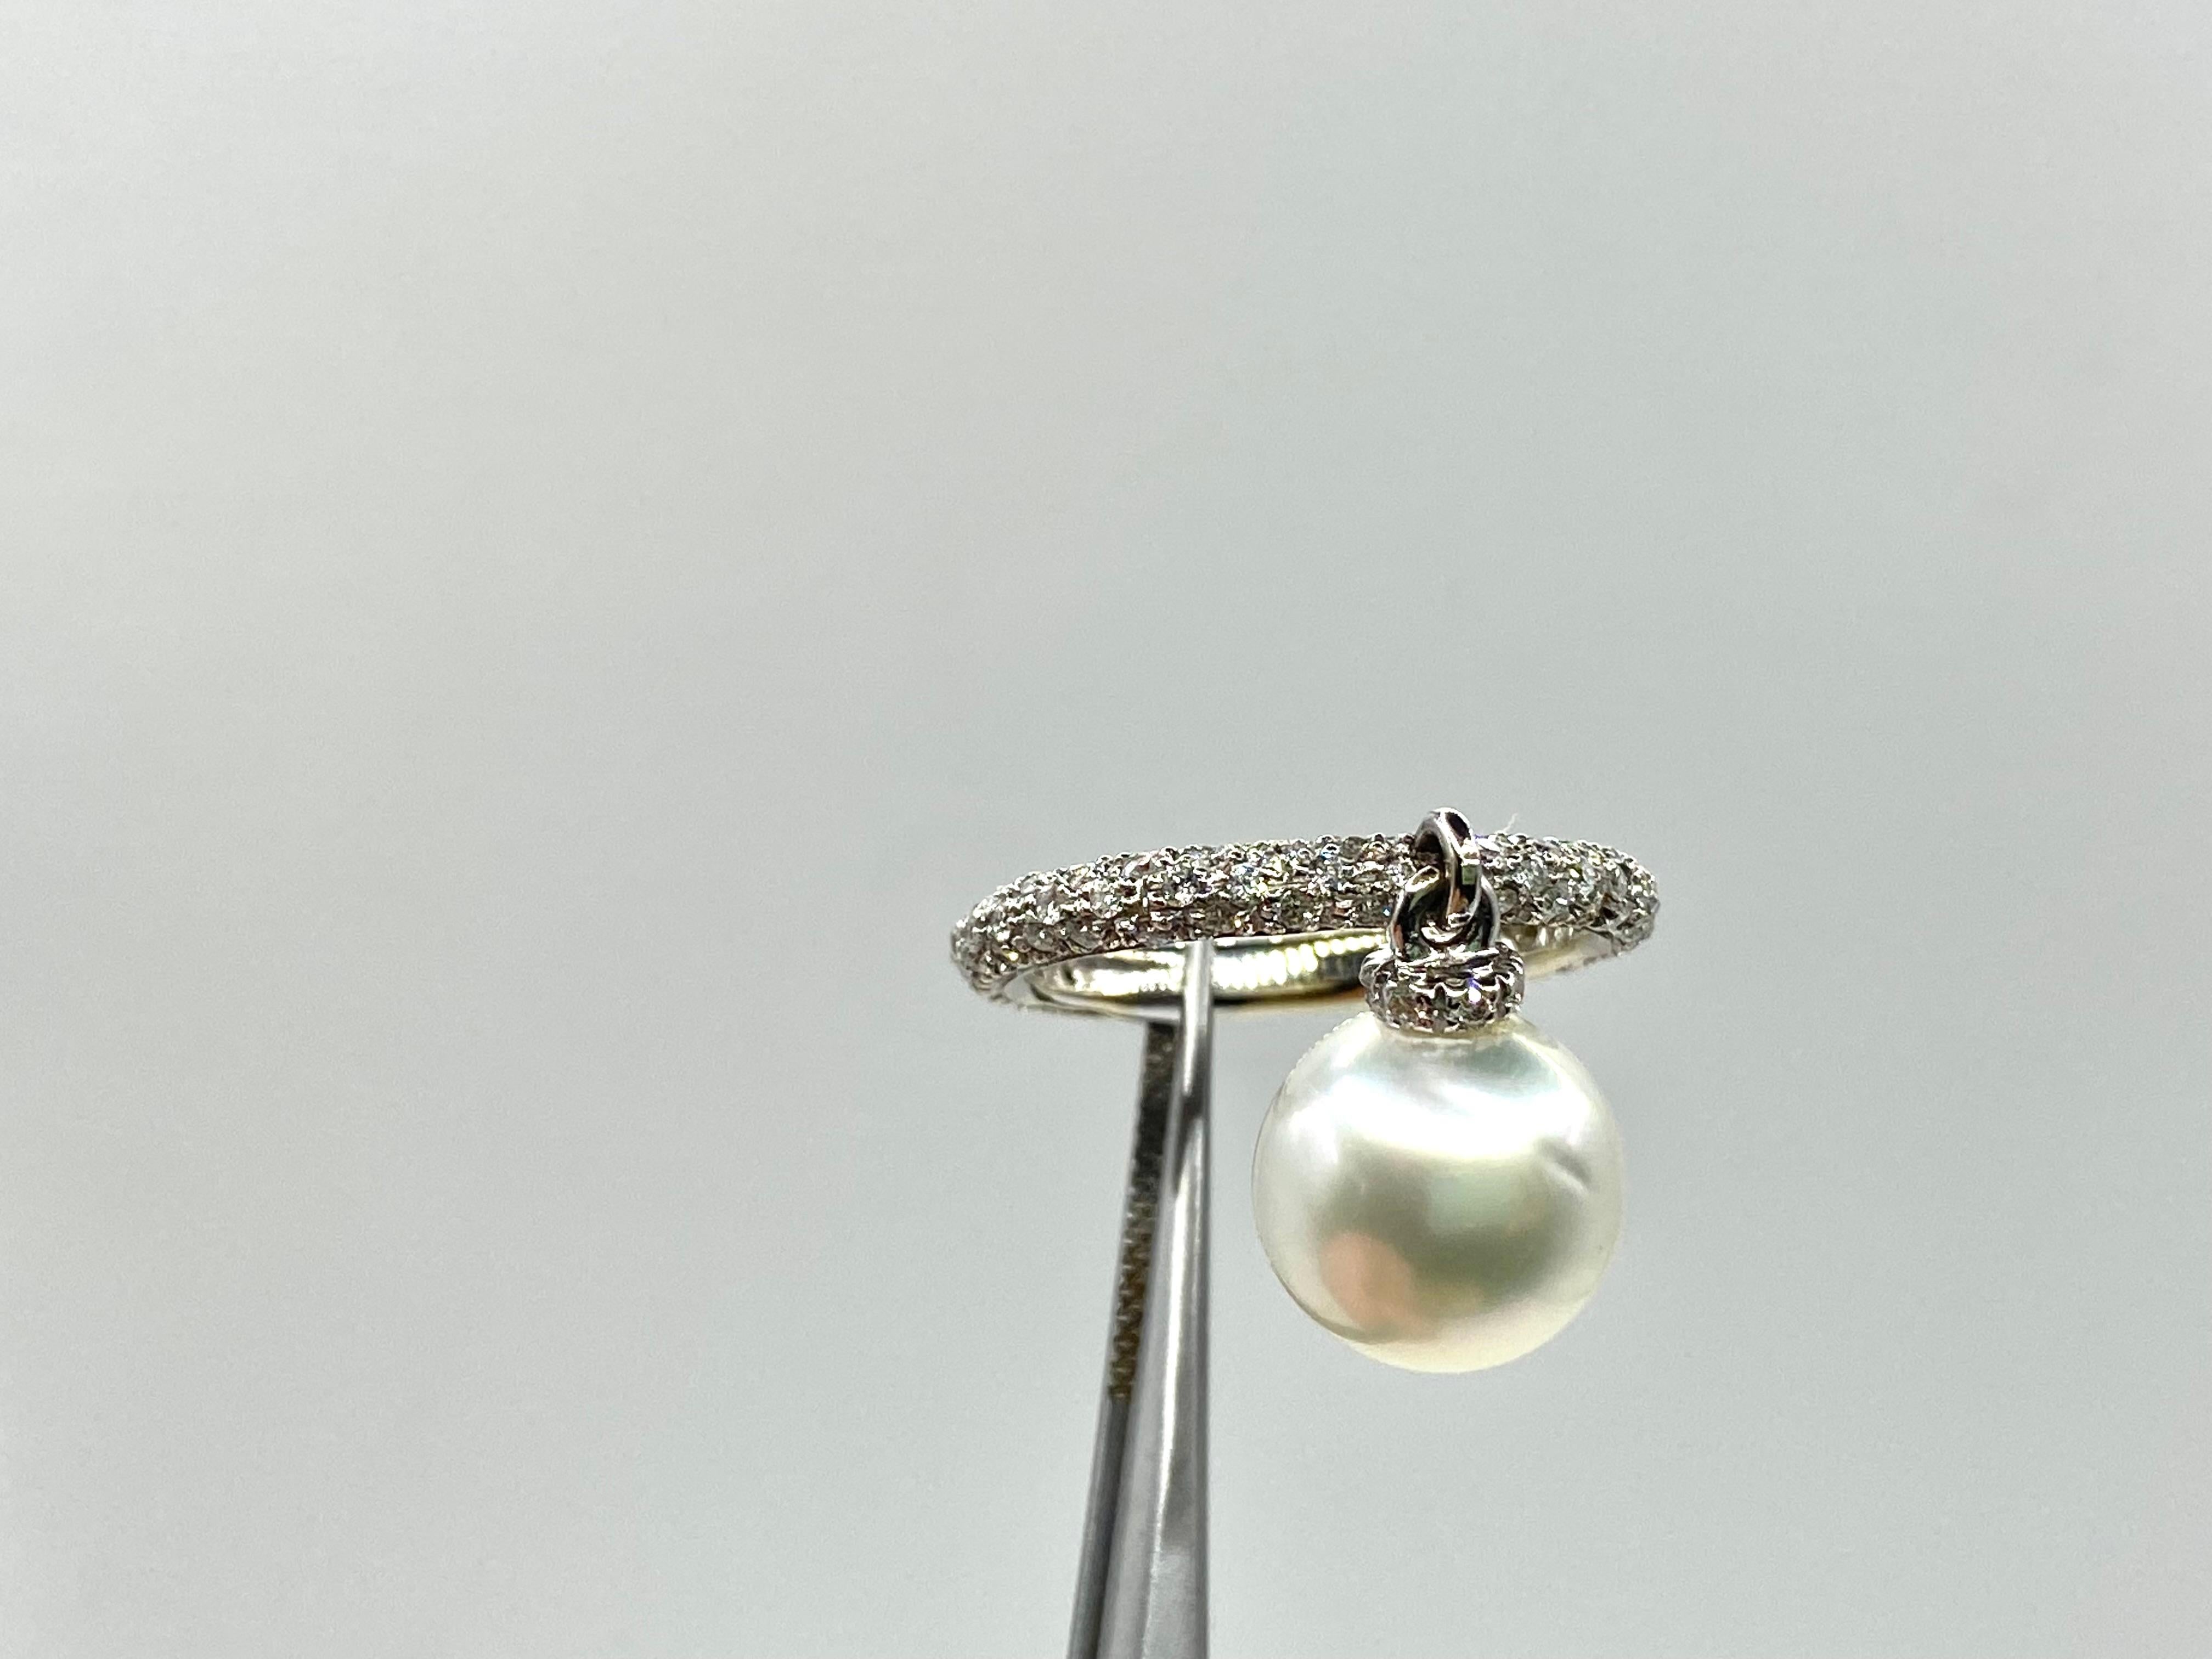 18 kt white gold ring, Australian cultured pearl mm 11, Movable, brilliant cut diamonds
Handmade. The Australian cultured pearl, called , ct 9, measures 11 mm.  18 kt gold. Brilliant cut diamonds set, color G, vs, 0.78 ct; It weighs 5.4  grams, size